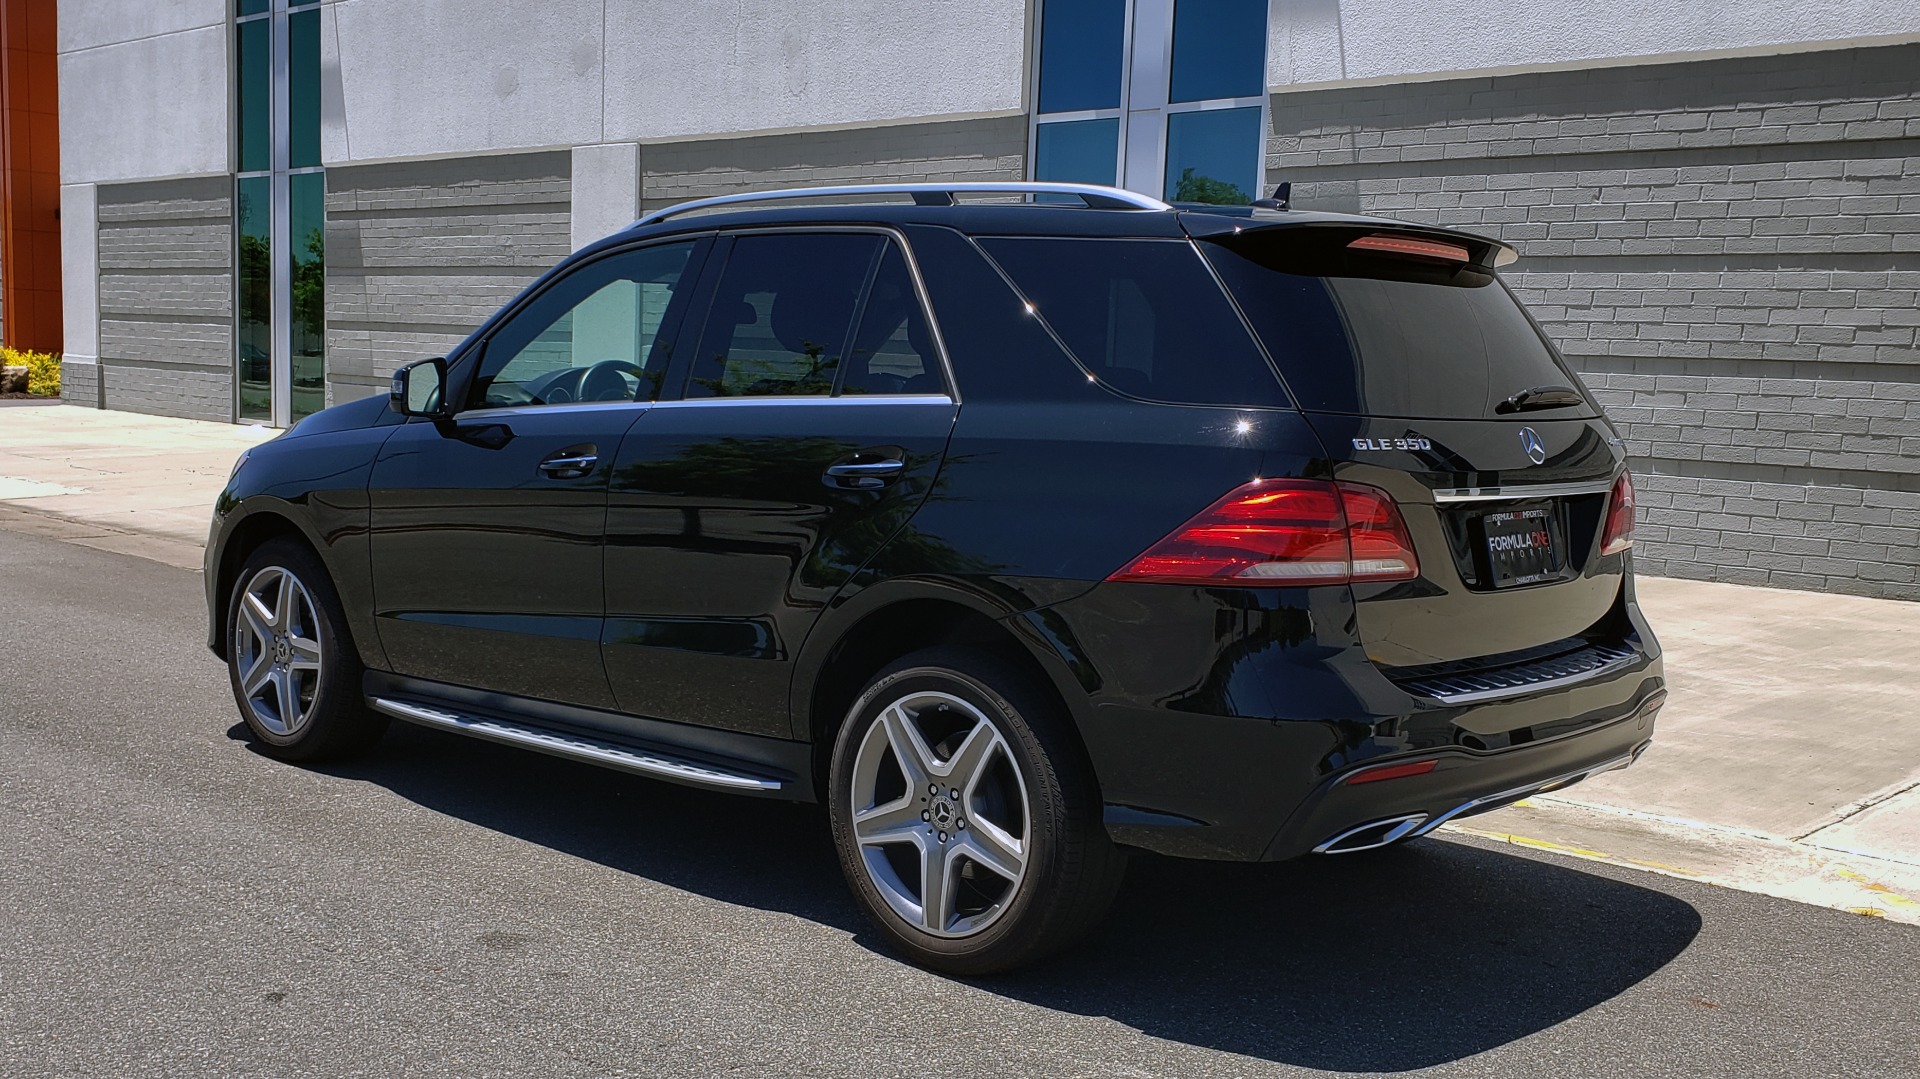 Used 2018 Mercedes-Benz GLE 350 4MATIC PREMIUM / NAV / AMG LINE INT / H/K SND / SUNROOF / REARVIEW for sale Sold at Formula Imports in Charlotte NC 28227 6